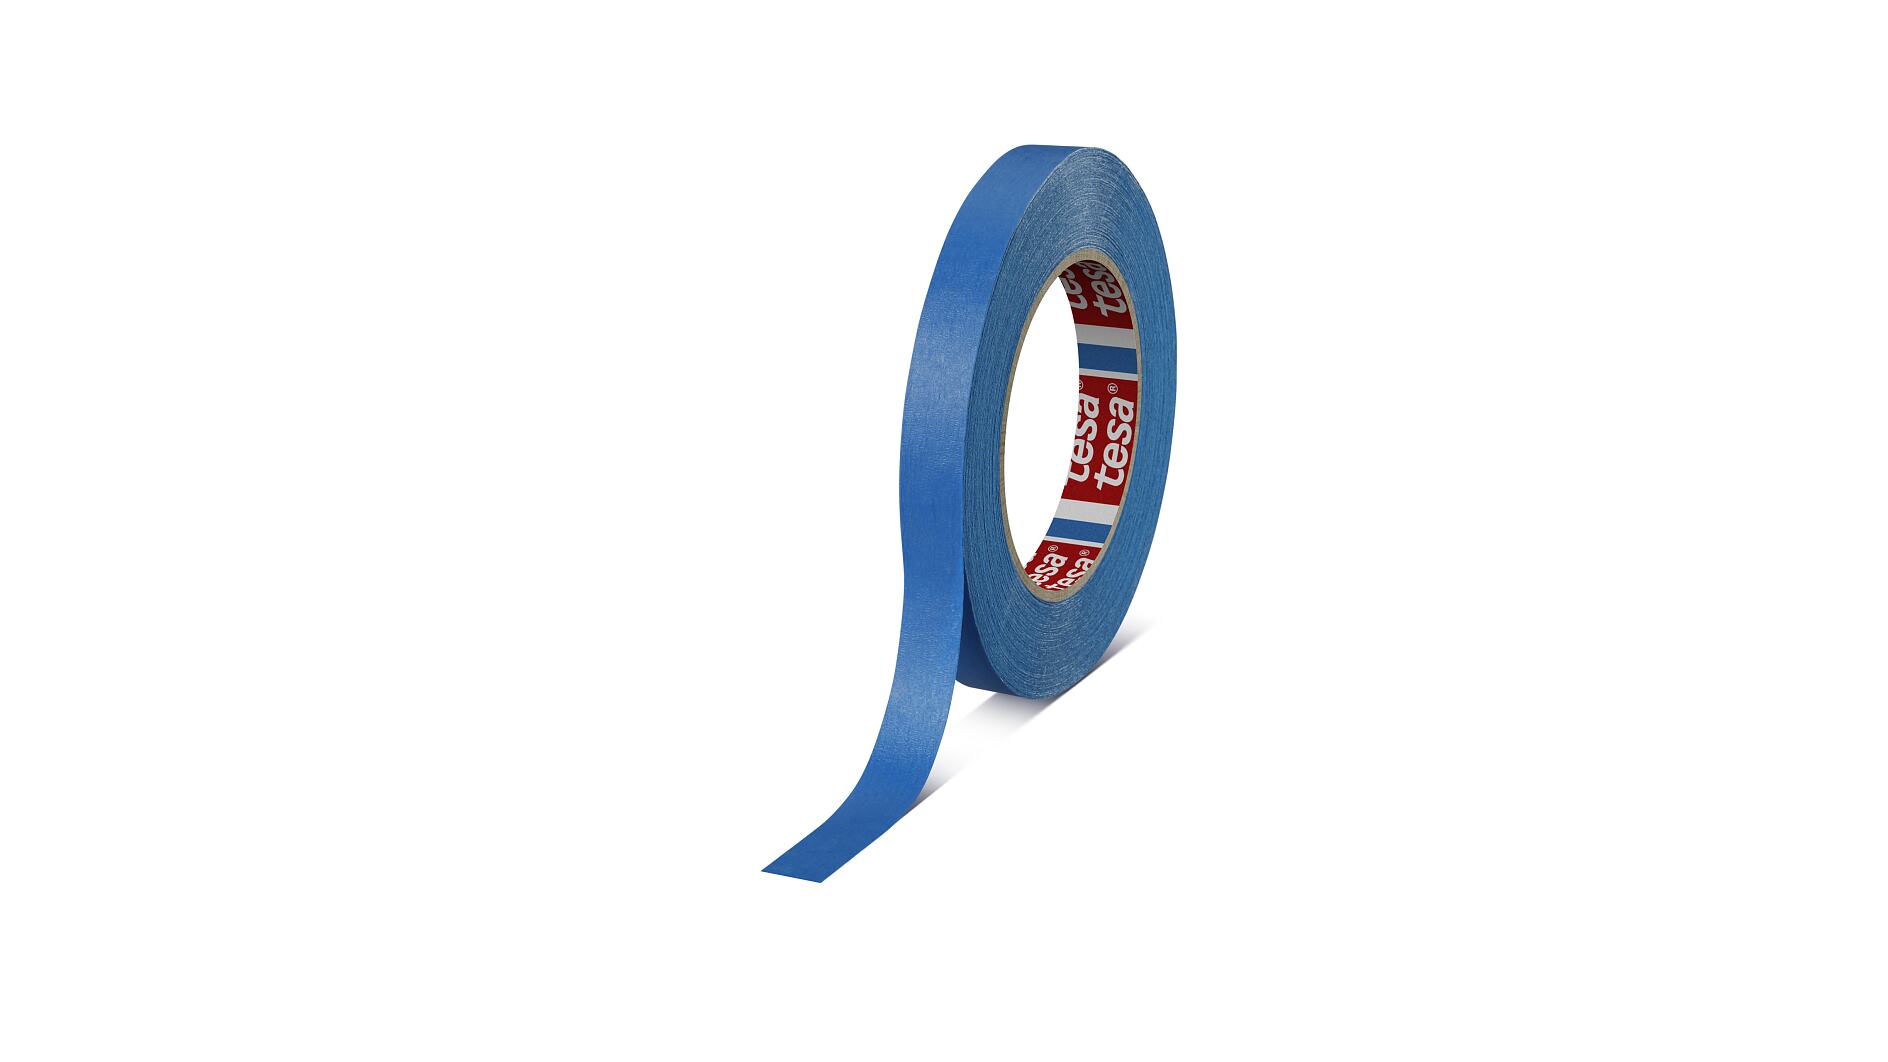 924978-1 Scotch-Blue Paper Masking Tape, Rubber Tape Adhesive, 9.80 mil  Thick, 1-27/64 X 45 yd., Blue, 1 EA